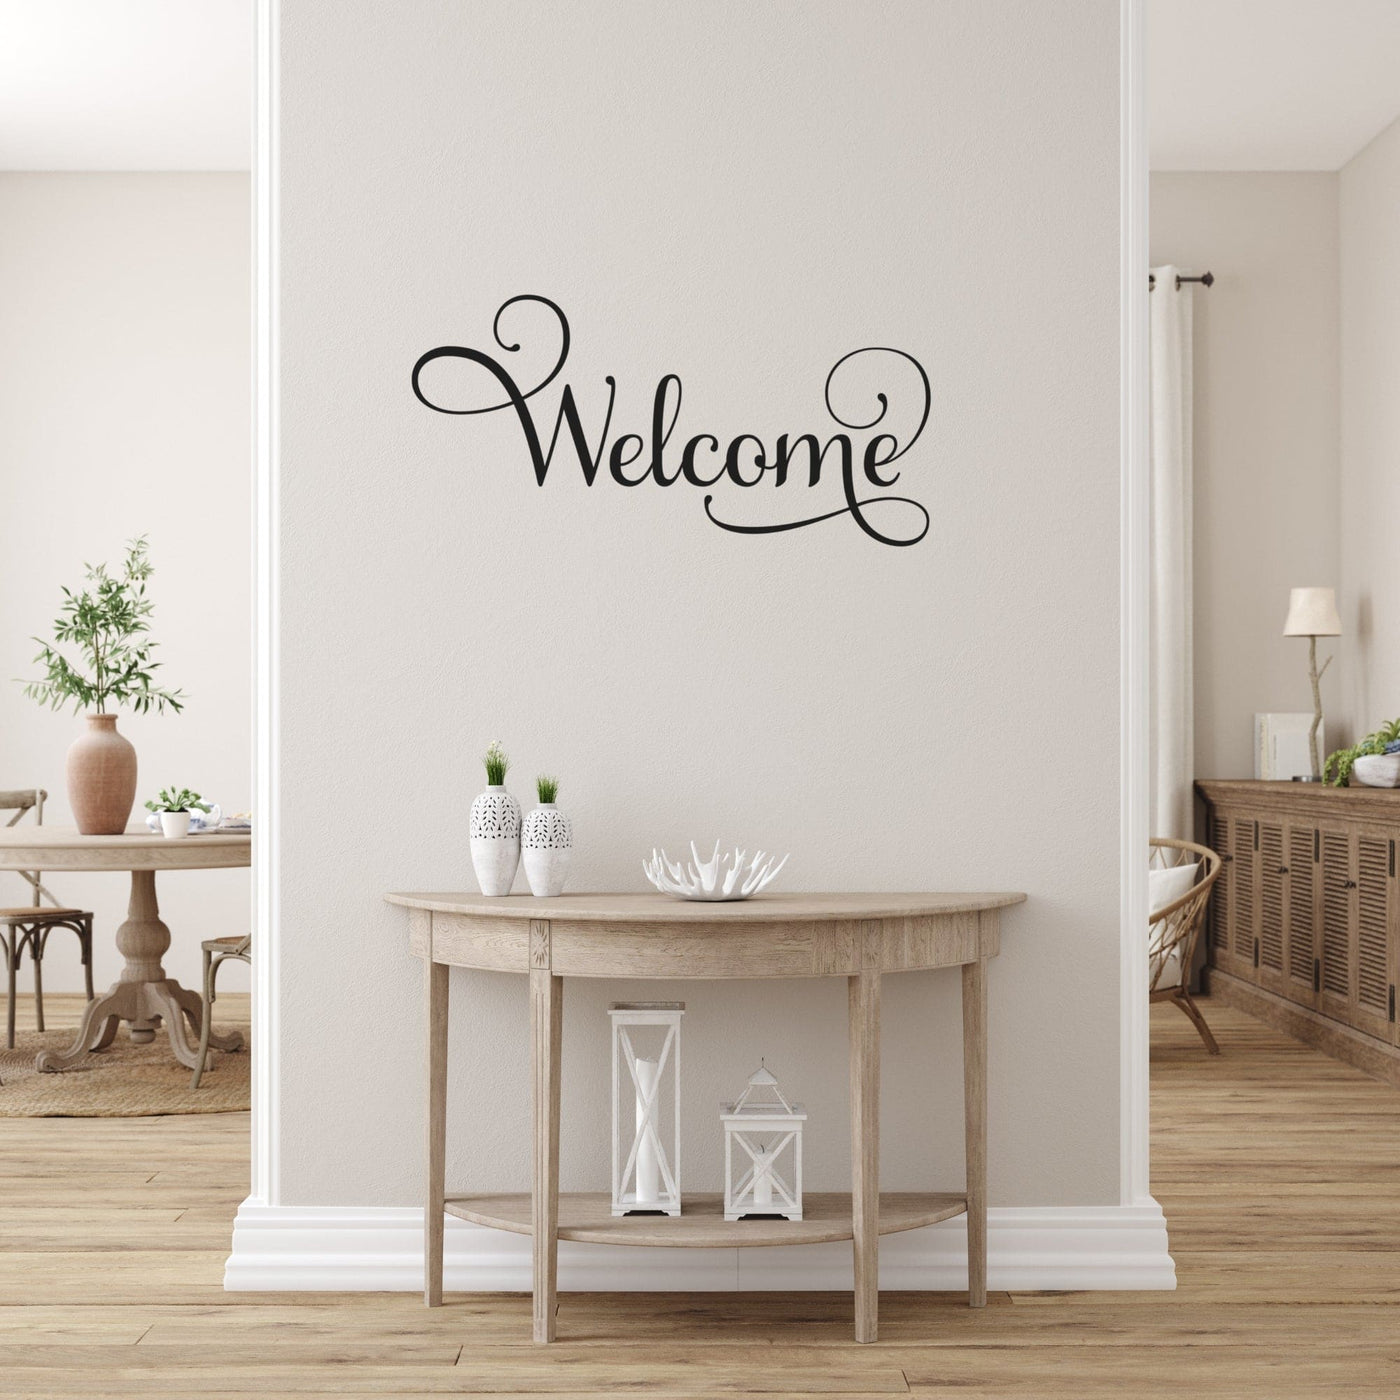 Decor - Welcome Removable Vinyl Wall Decal Easy Peel And Stick Wall Art -